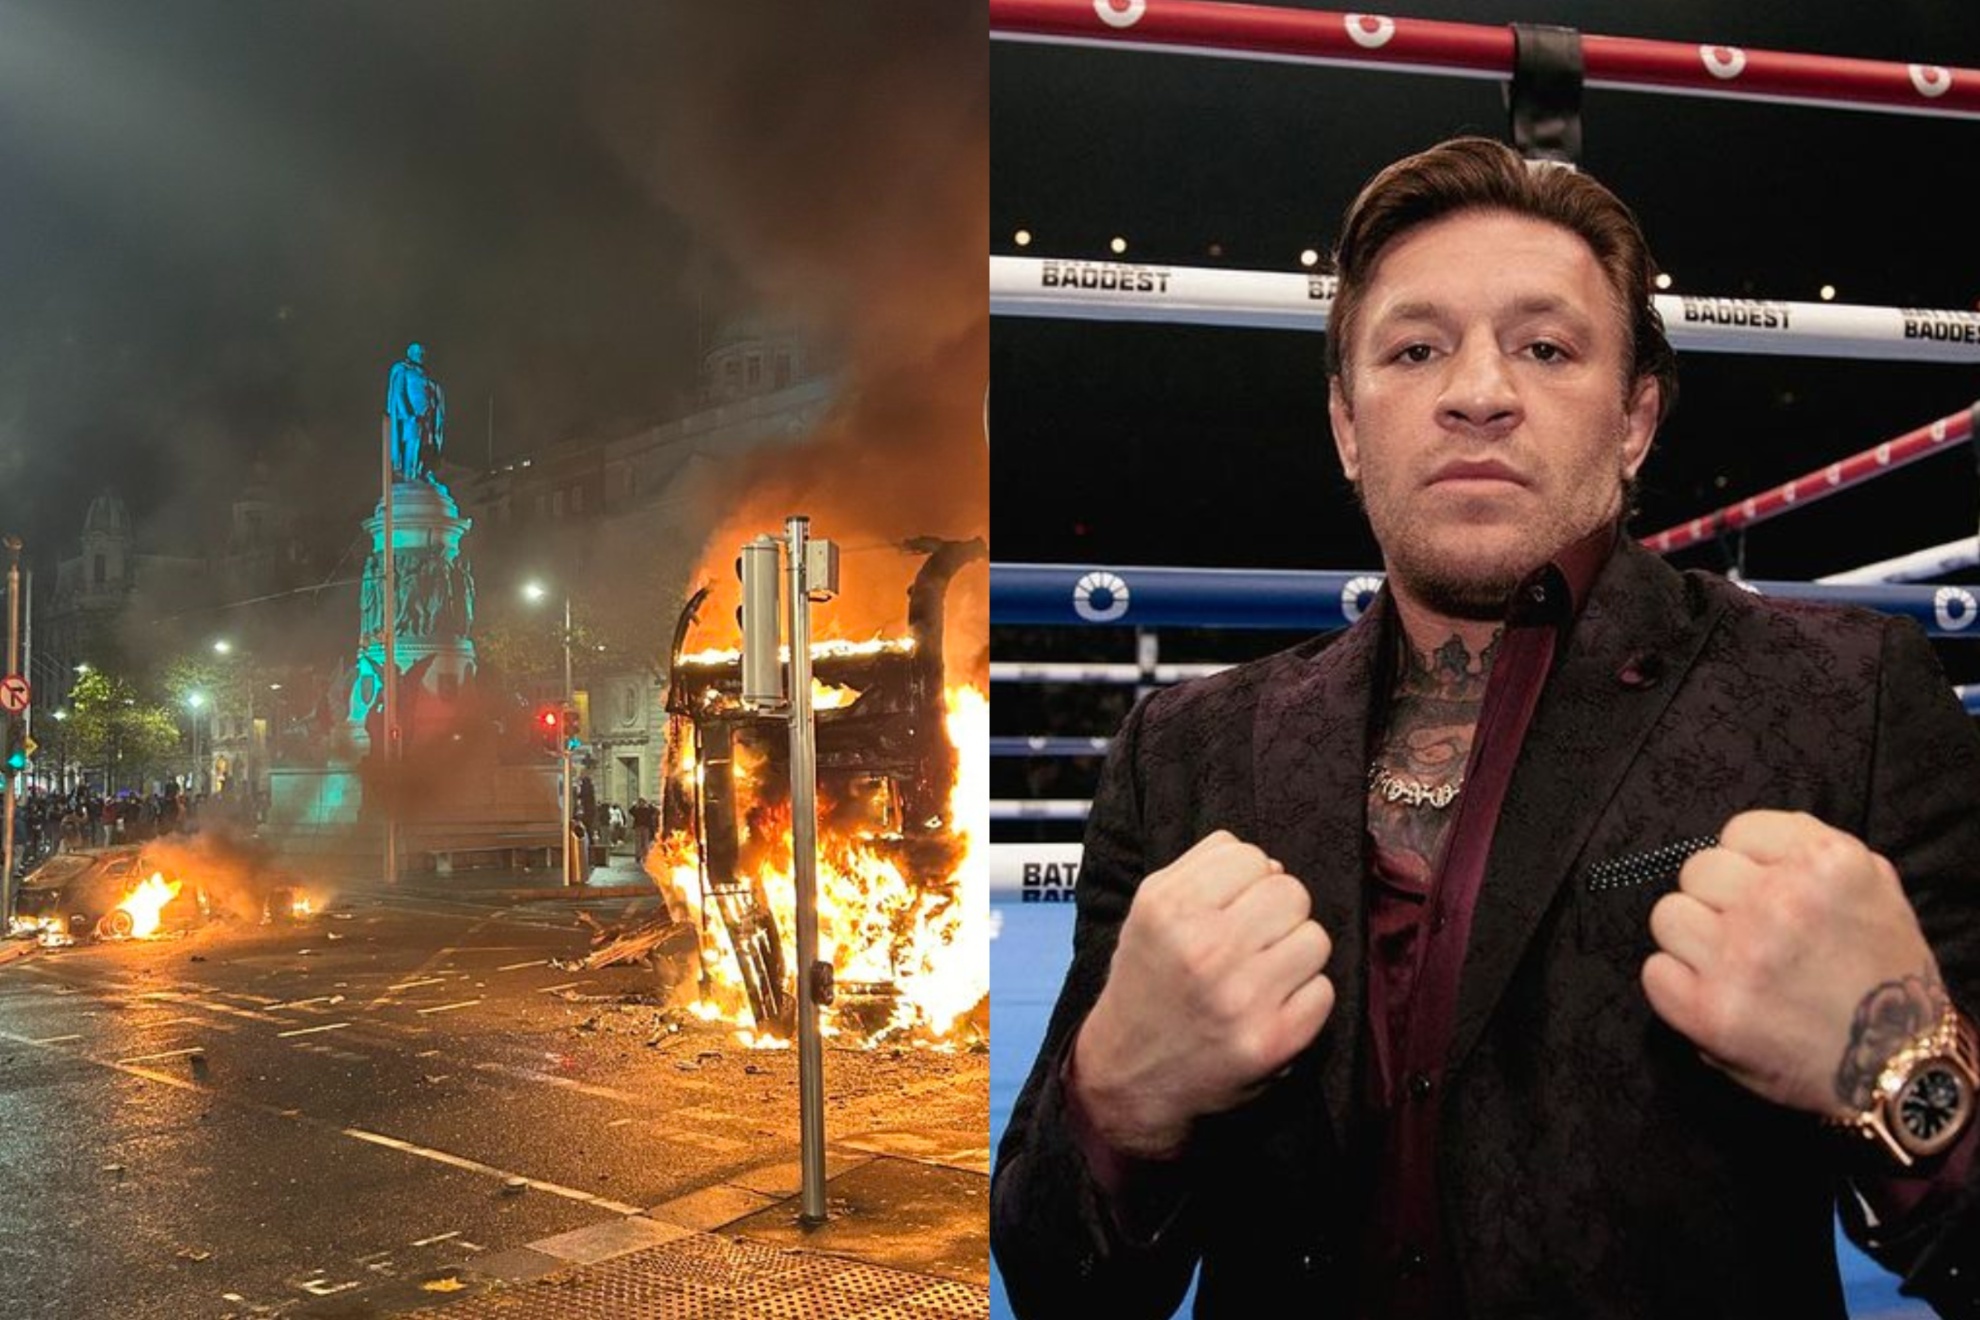 Mashup image of Dublin riots and Conor McGregor